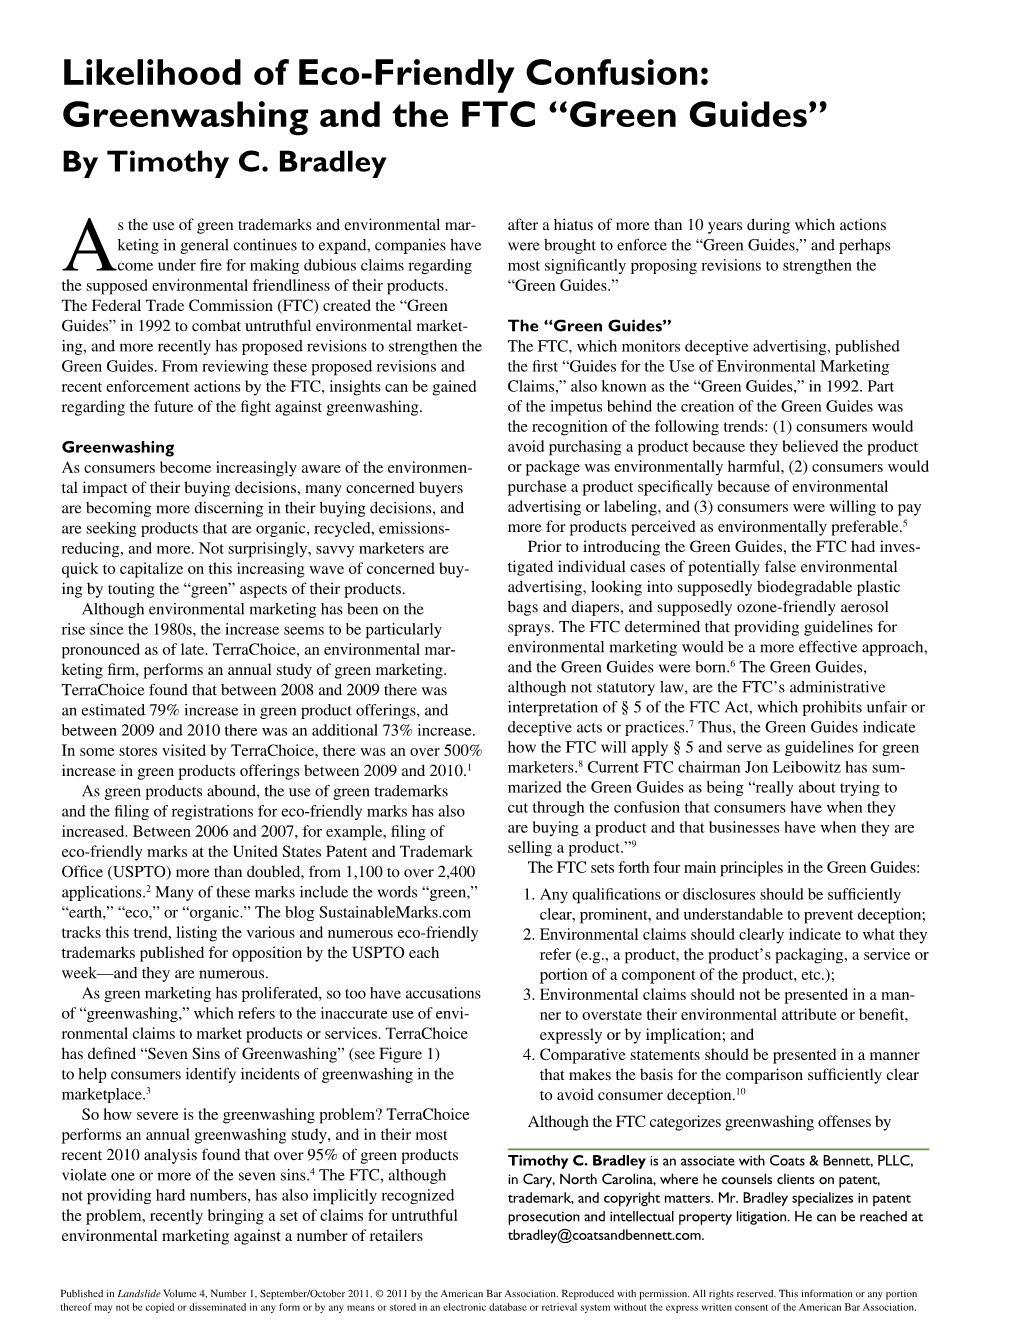 Likelihood of Eco-Friendly Confusion: Greenwashing and the FTC “Green Guides” by Timothy C